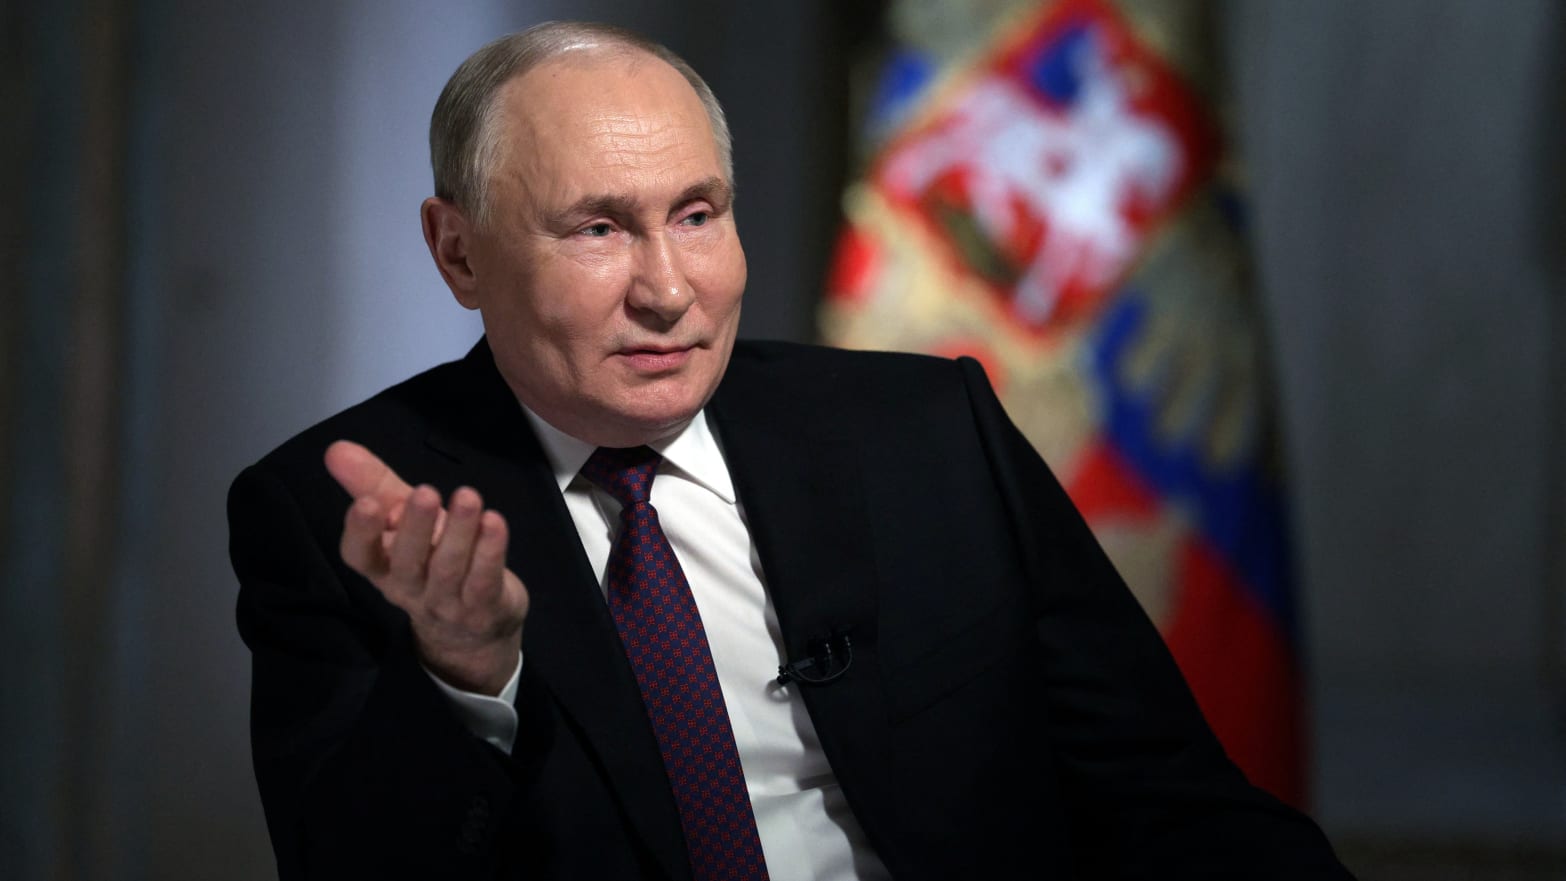 Vladimir Putin said in an interview with state television that Russia is ready to use nuclear weapons. 